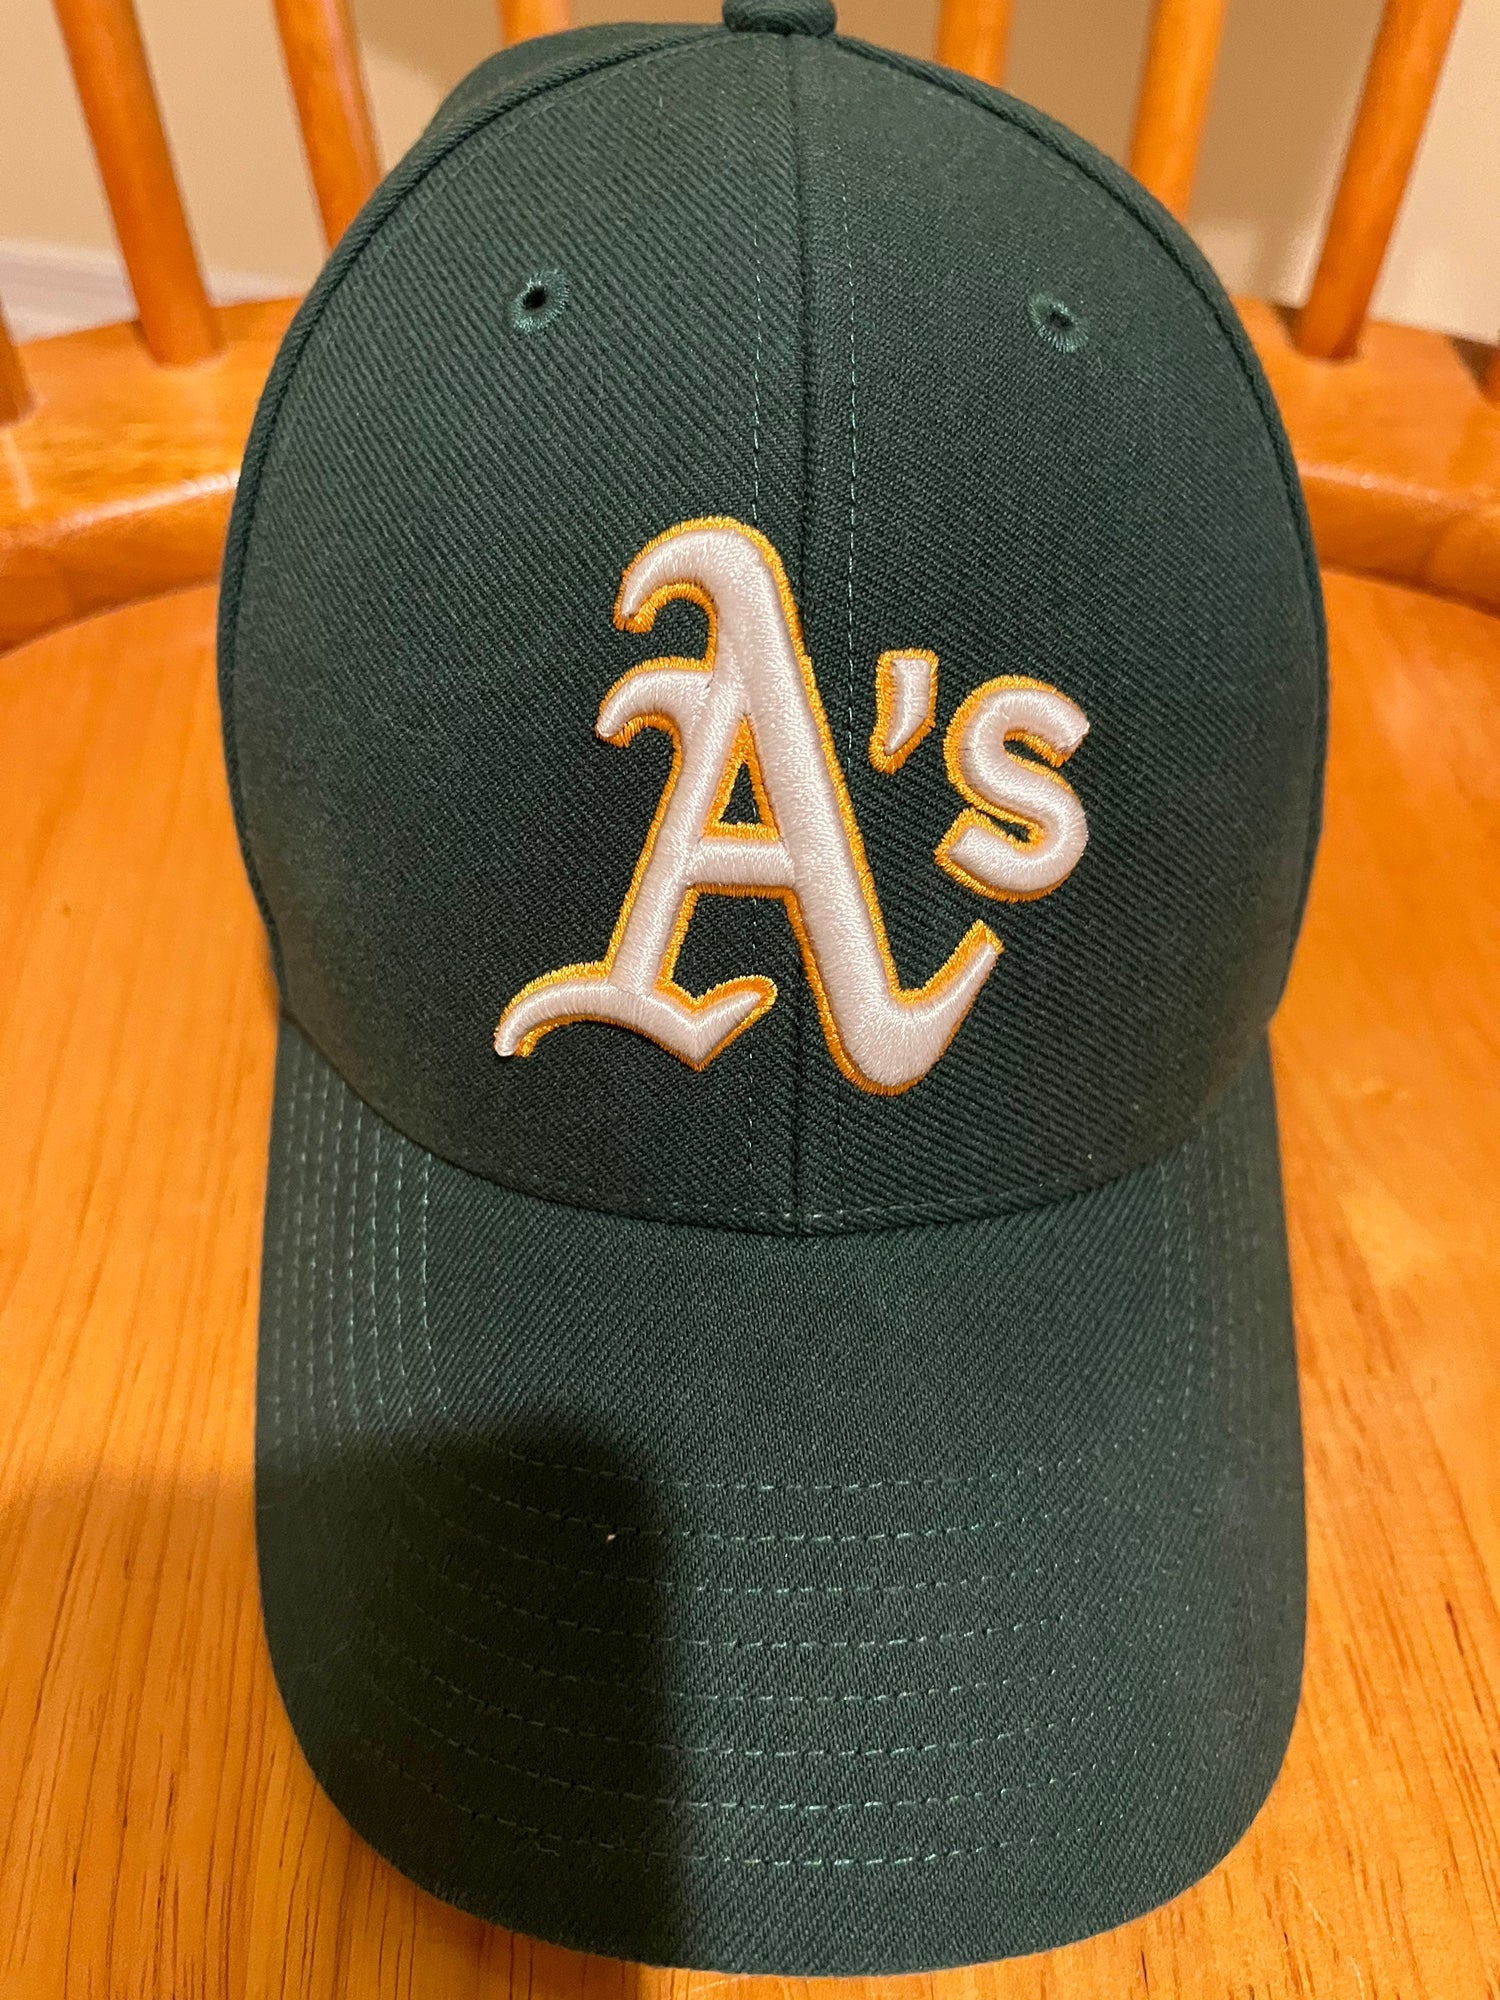 Era OAKLAND A's Athletics Spring Training 2020 Fitted Hat Cap Size 7 1/8 MLB